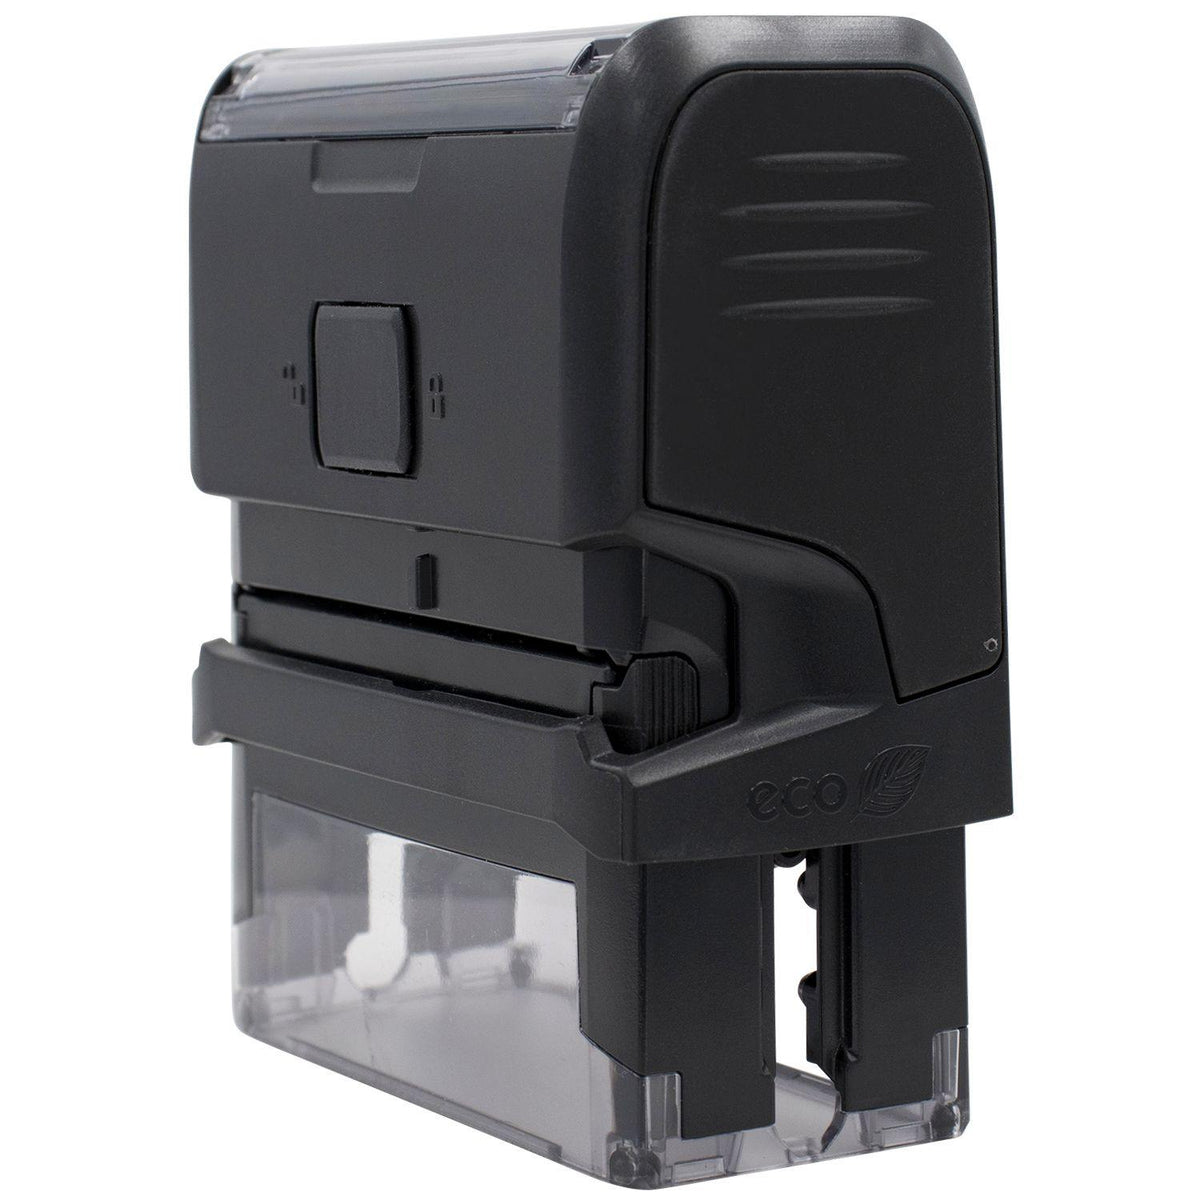 Self-Inking Contestado Stamp - Engineer Seal Stamps - Brand_Trodat, Impression Size_Small, Stamp Type_Self-Inking Stamp, Type of Use_Business, Type of Use_General, Type of Use_Office